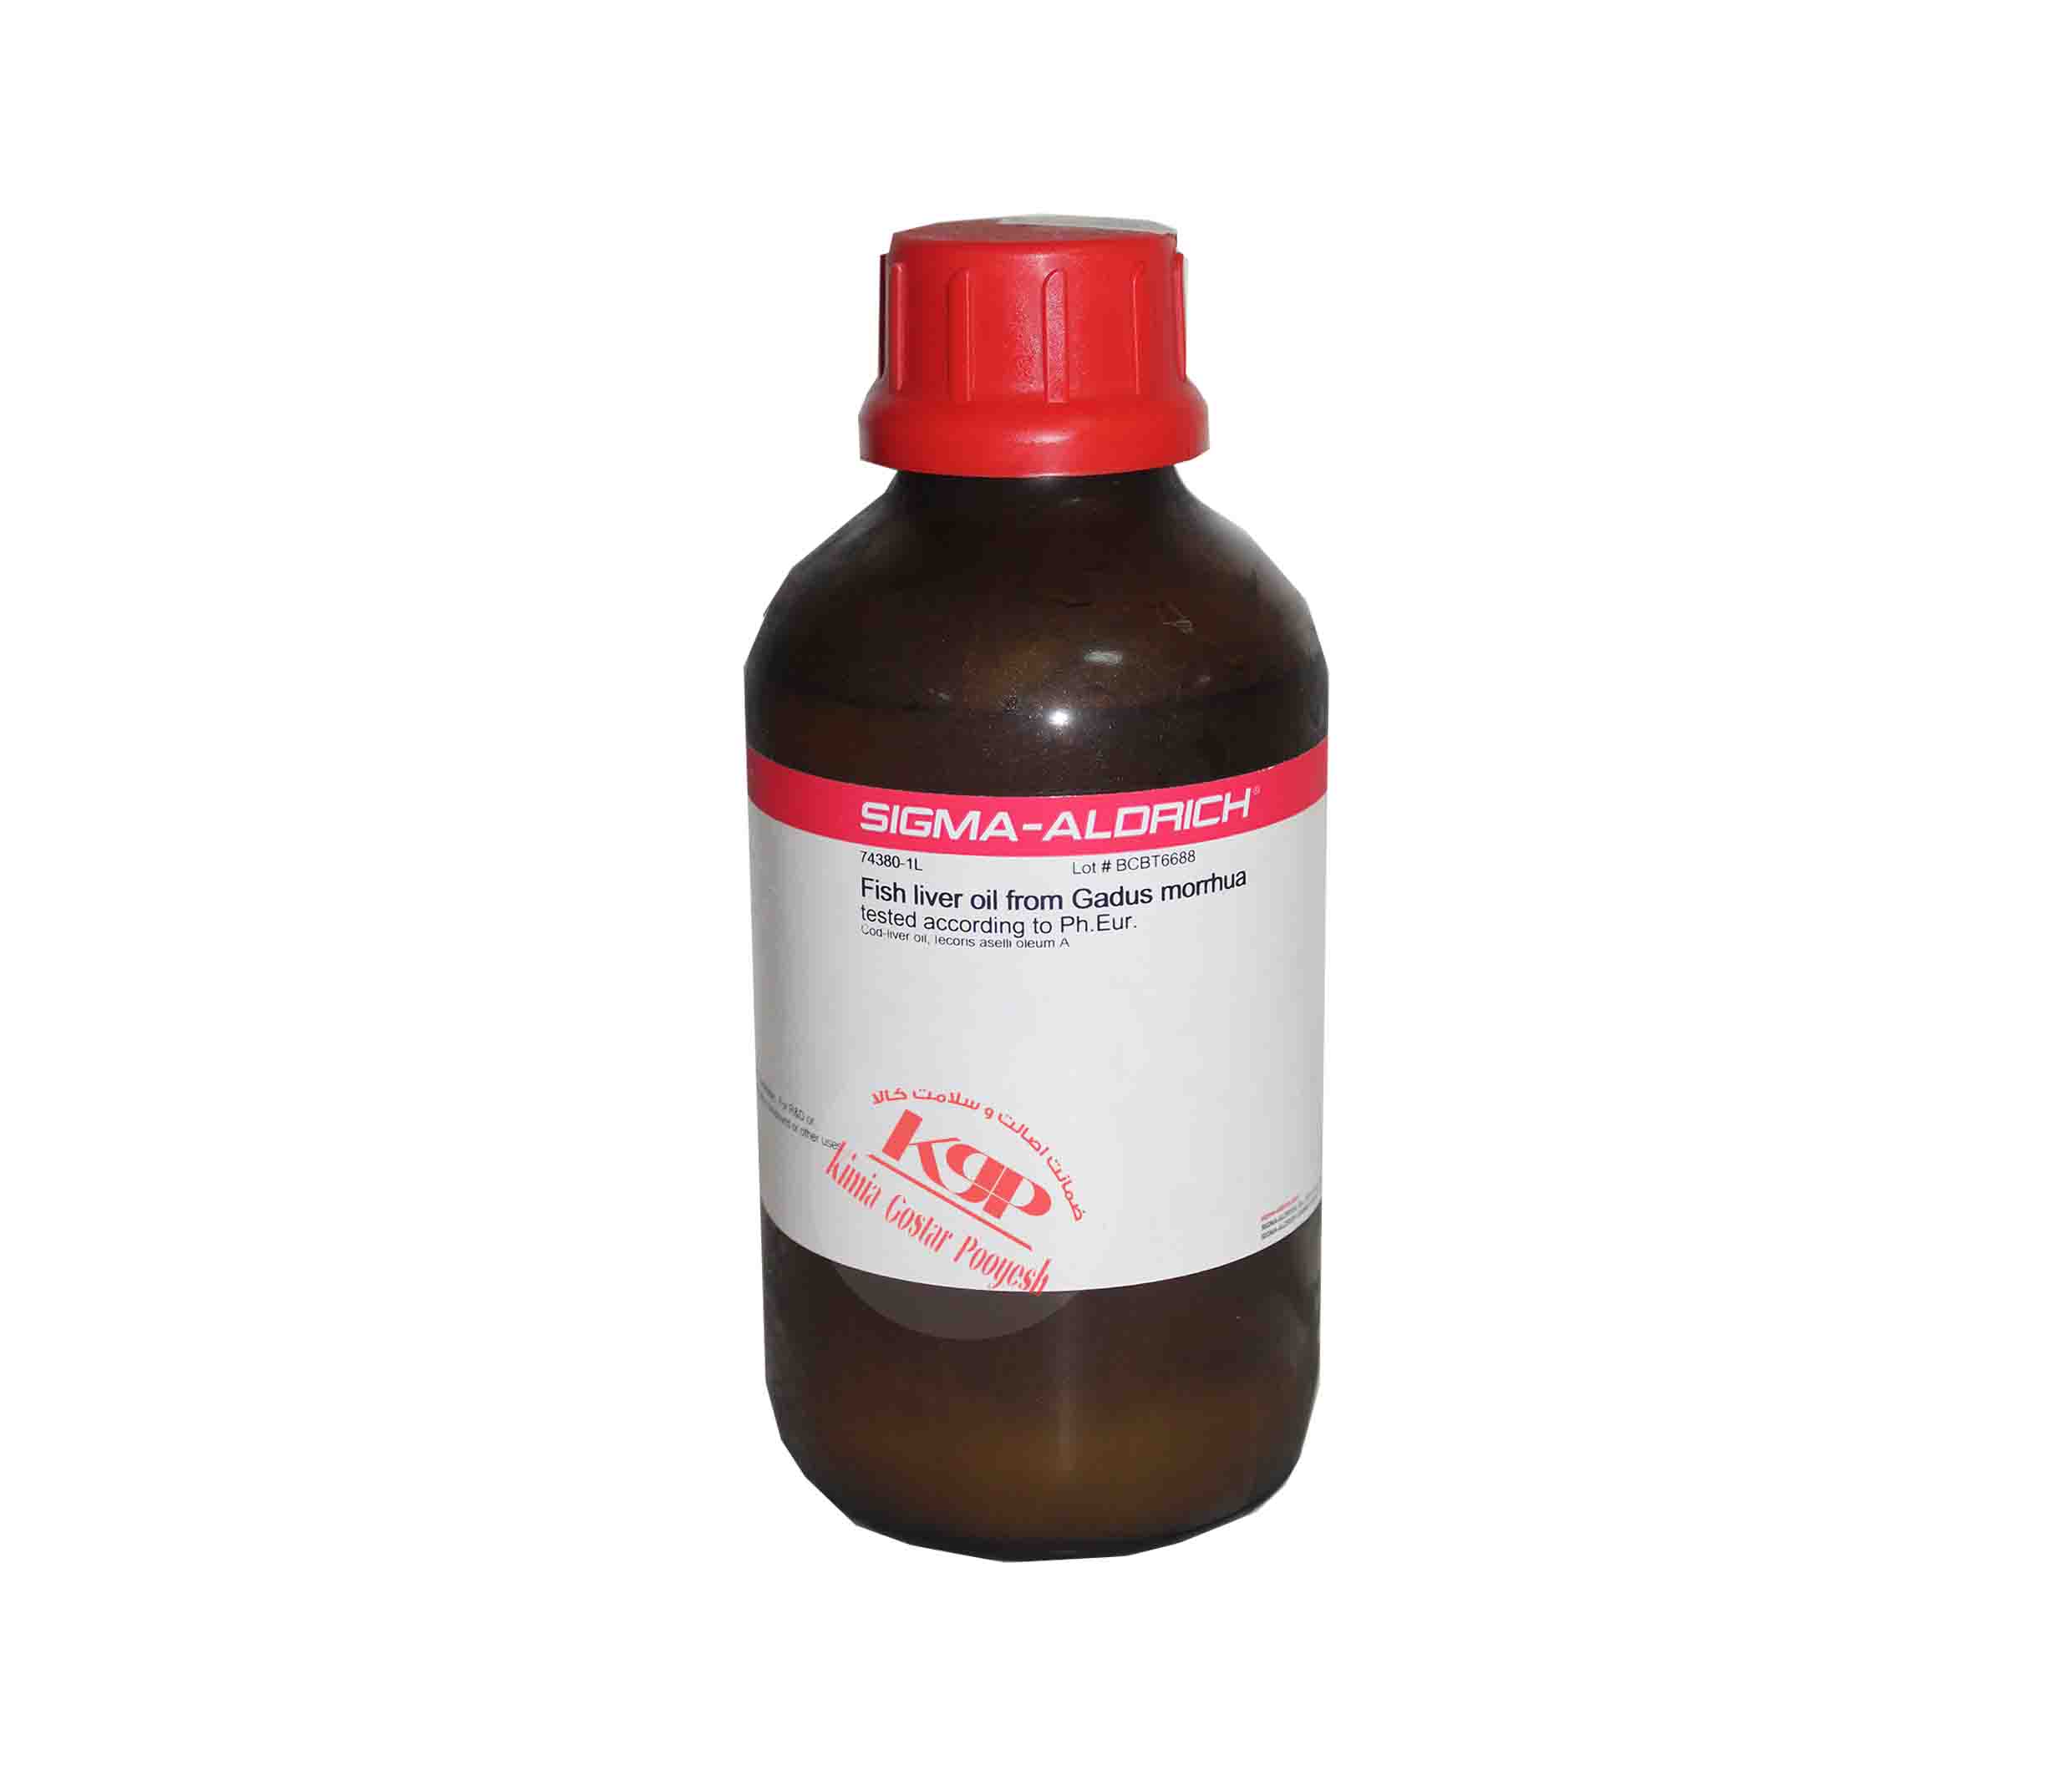 Fish liver oil from Gadus morrhua